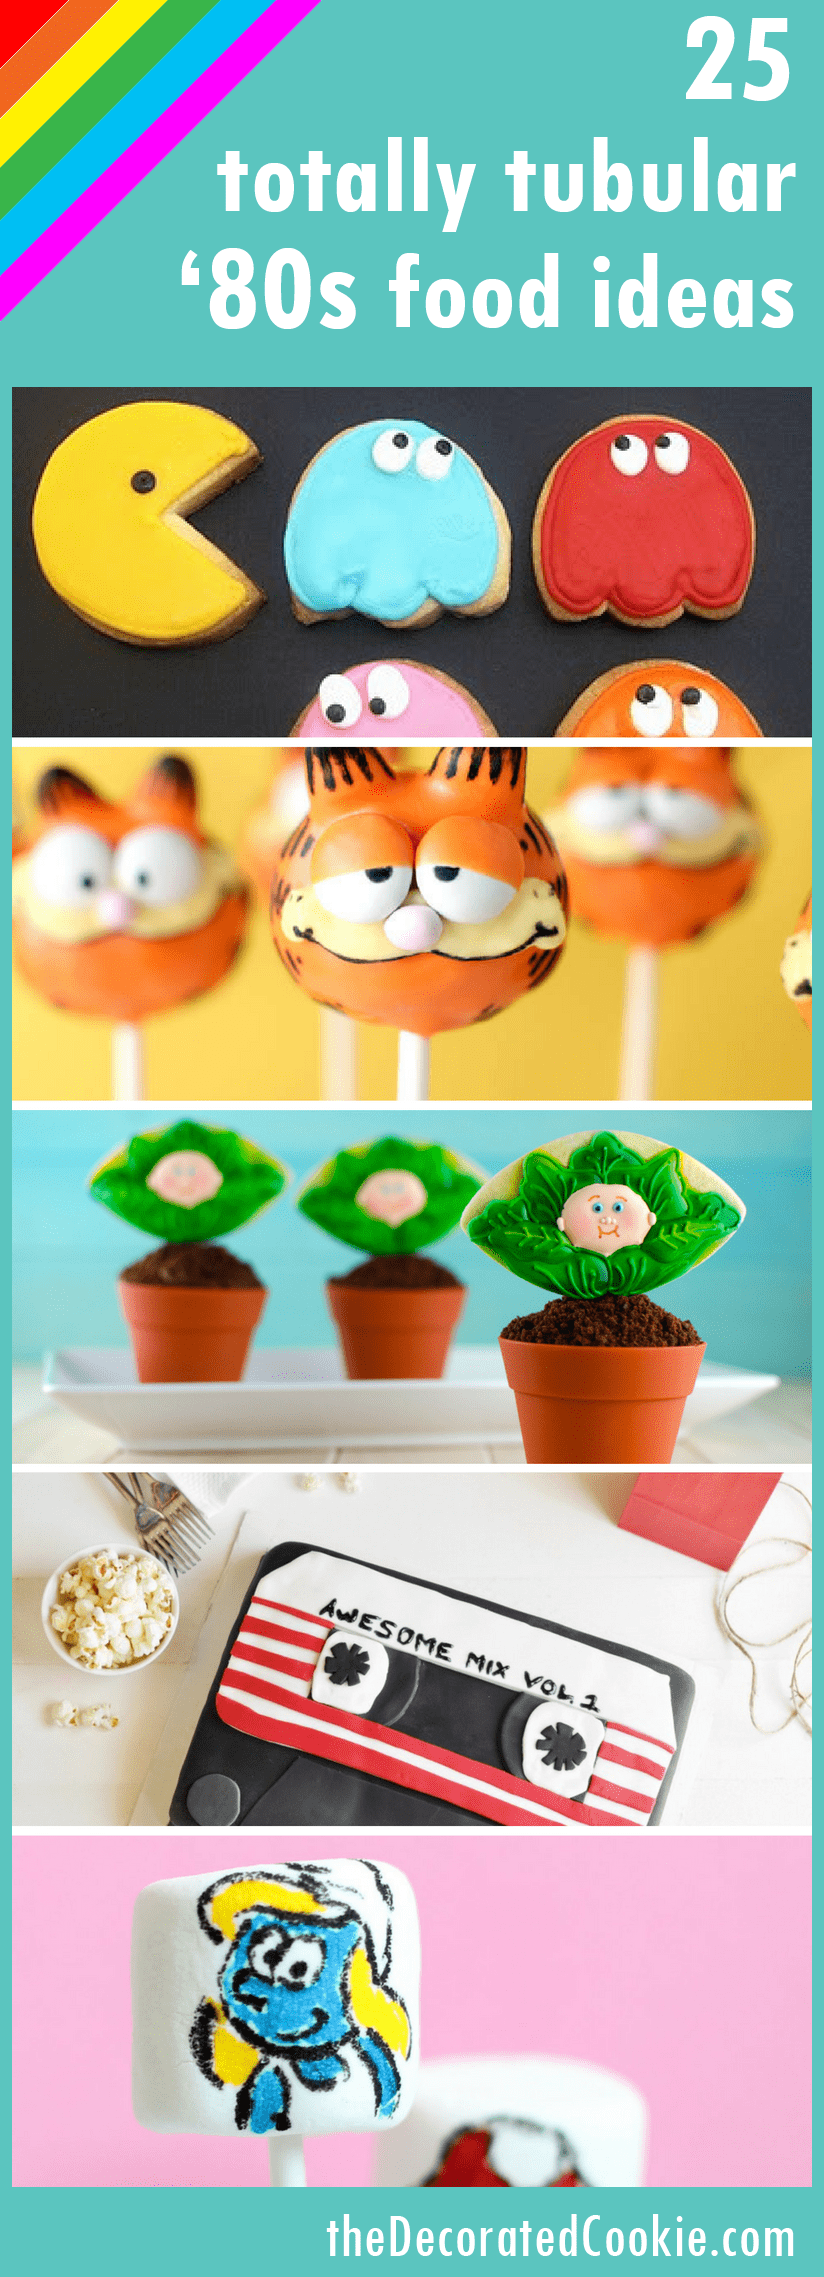 80s party fun food ideas roundup 